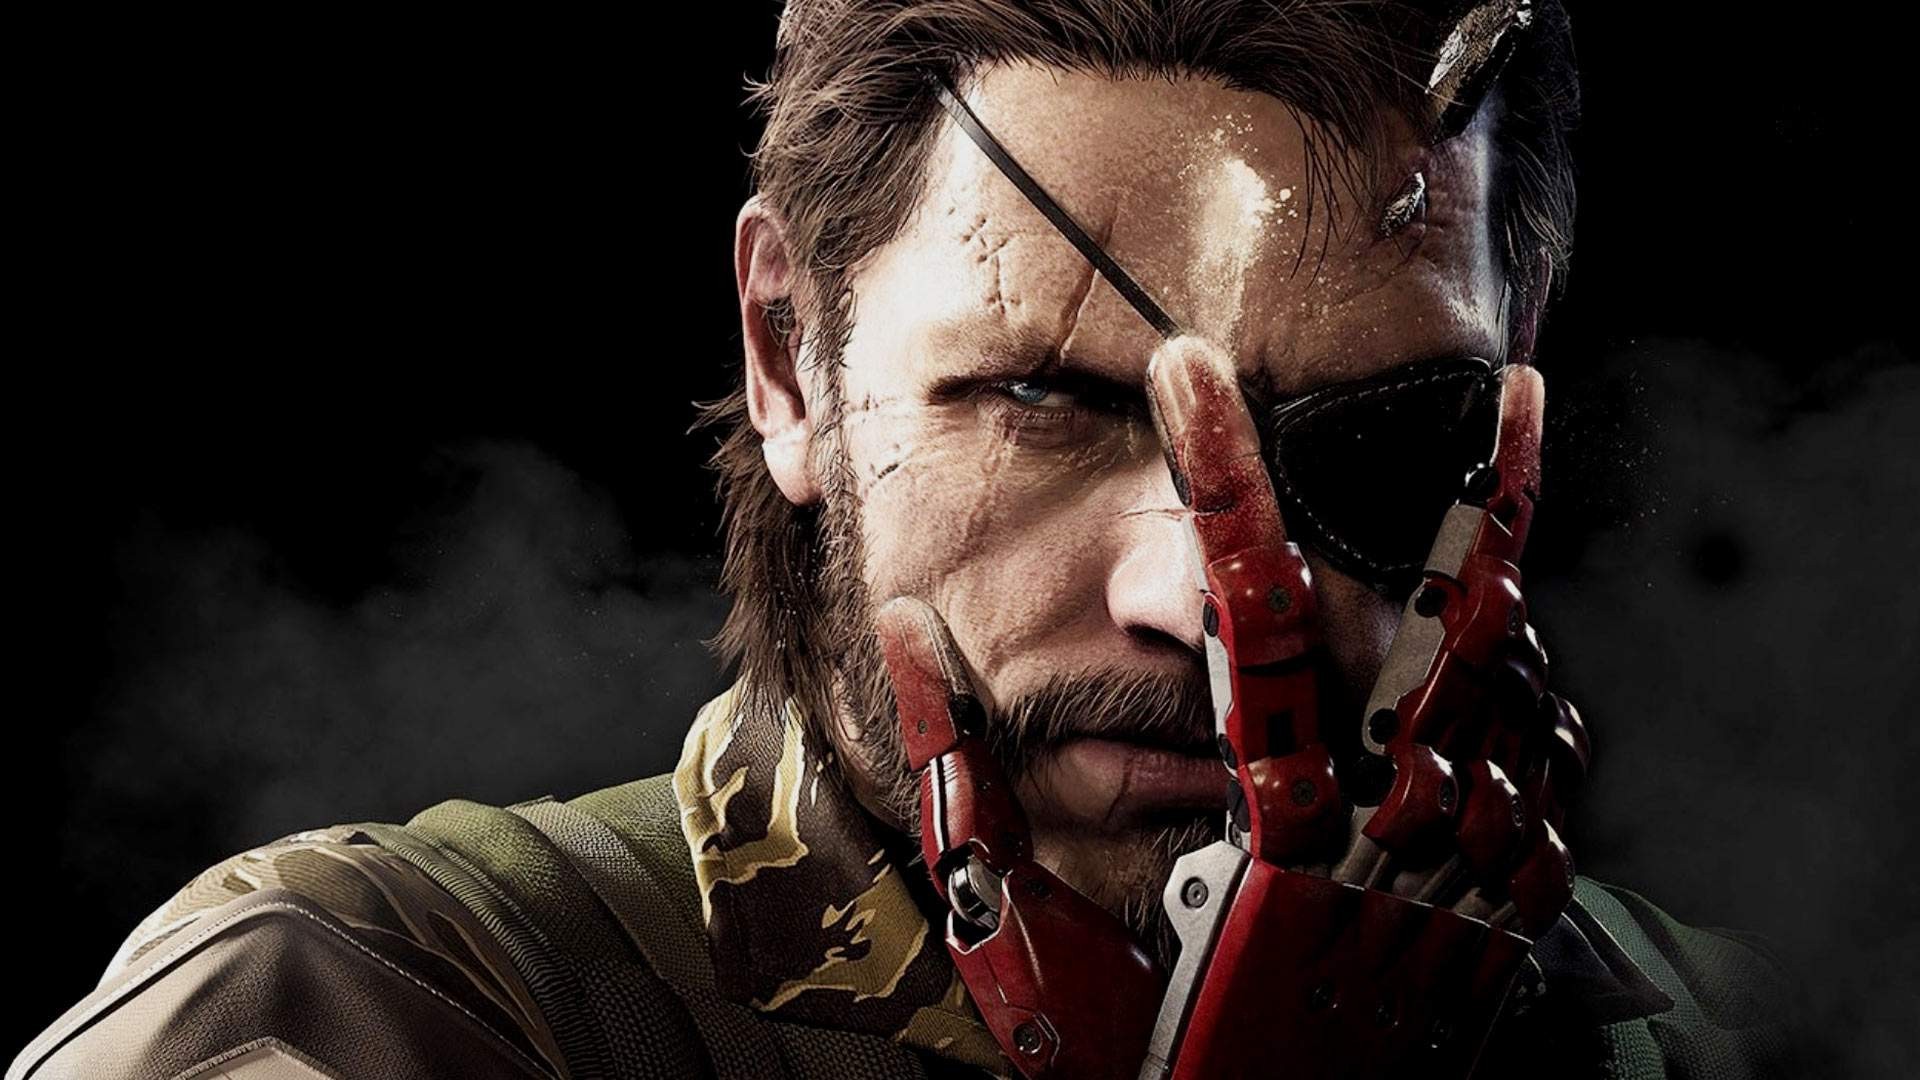 Metal Gear Solid V The Phantom Pain Digital Art Video Games Soldier Warrior Scars Face Eye Patch Con 1920x1080